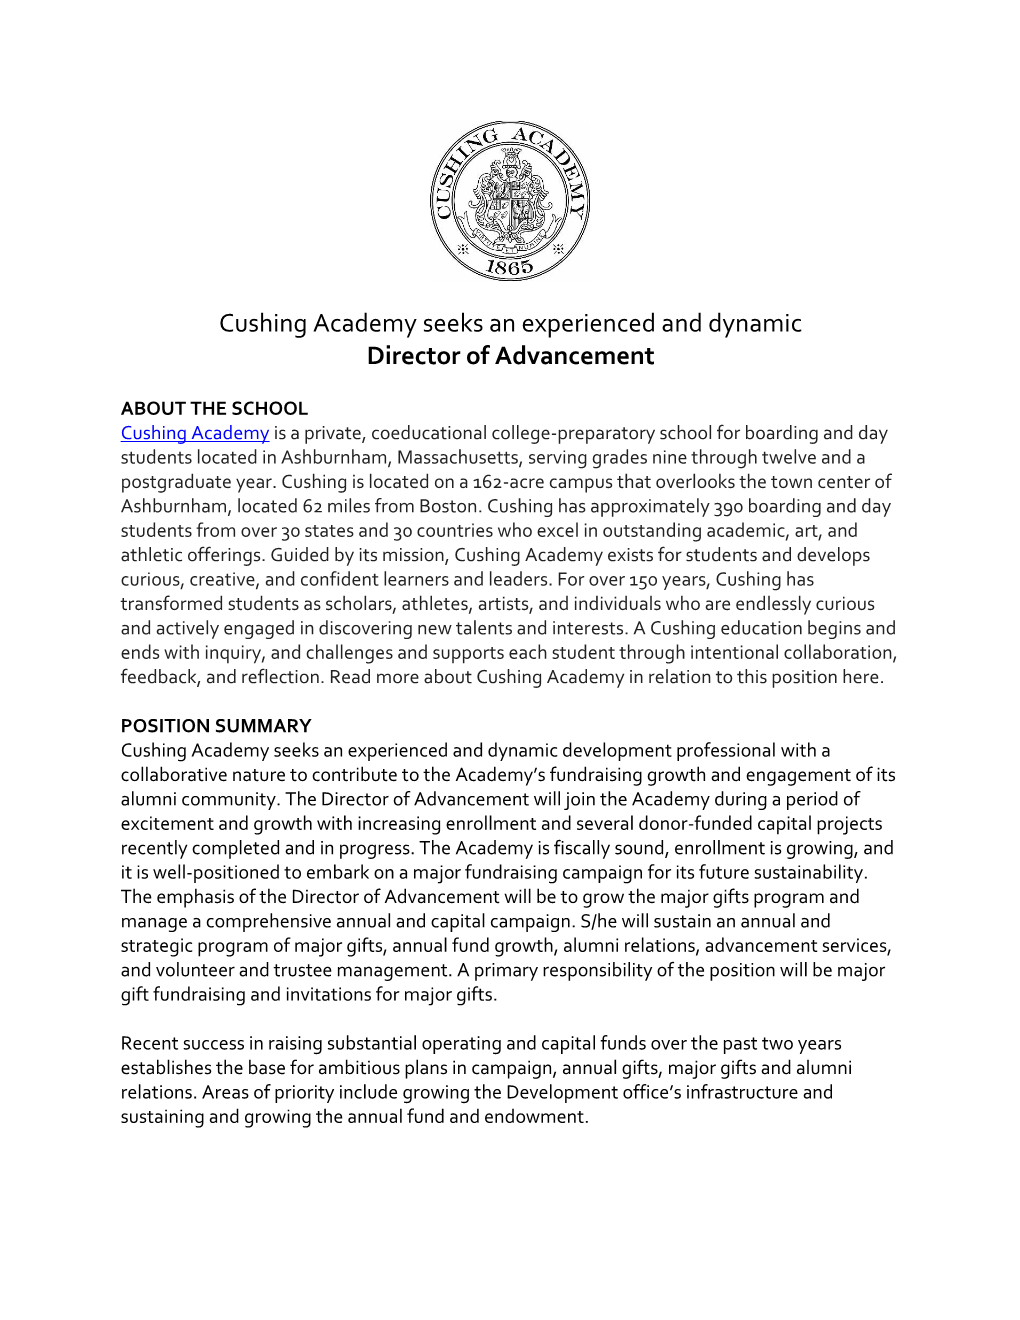 Cushing Academy Seeks an Experienced and Dynamic Director of Advancement